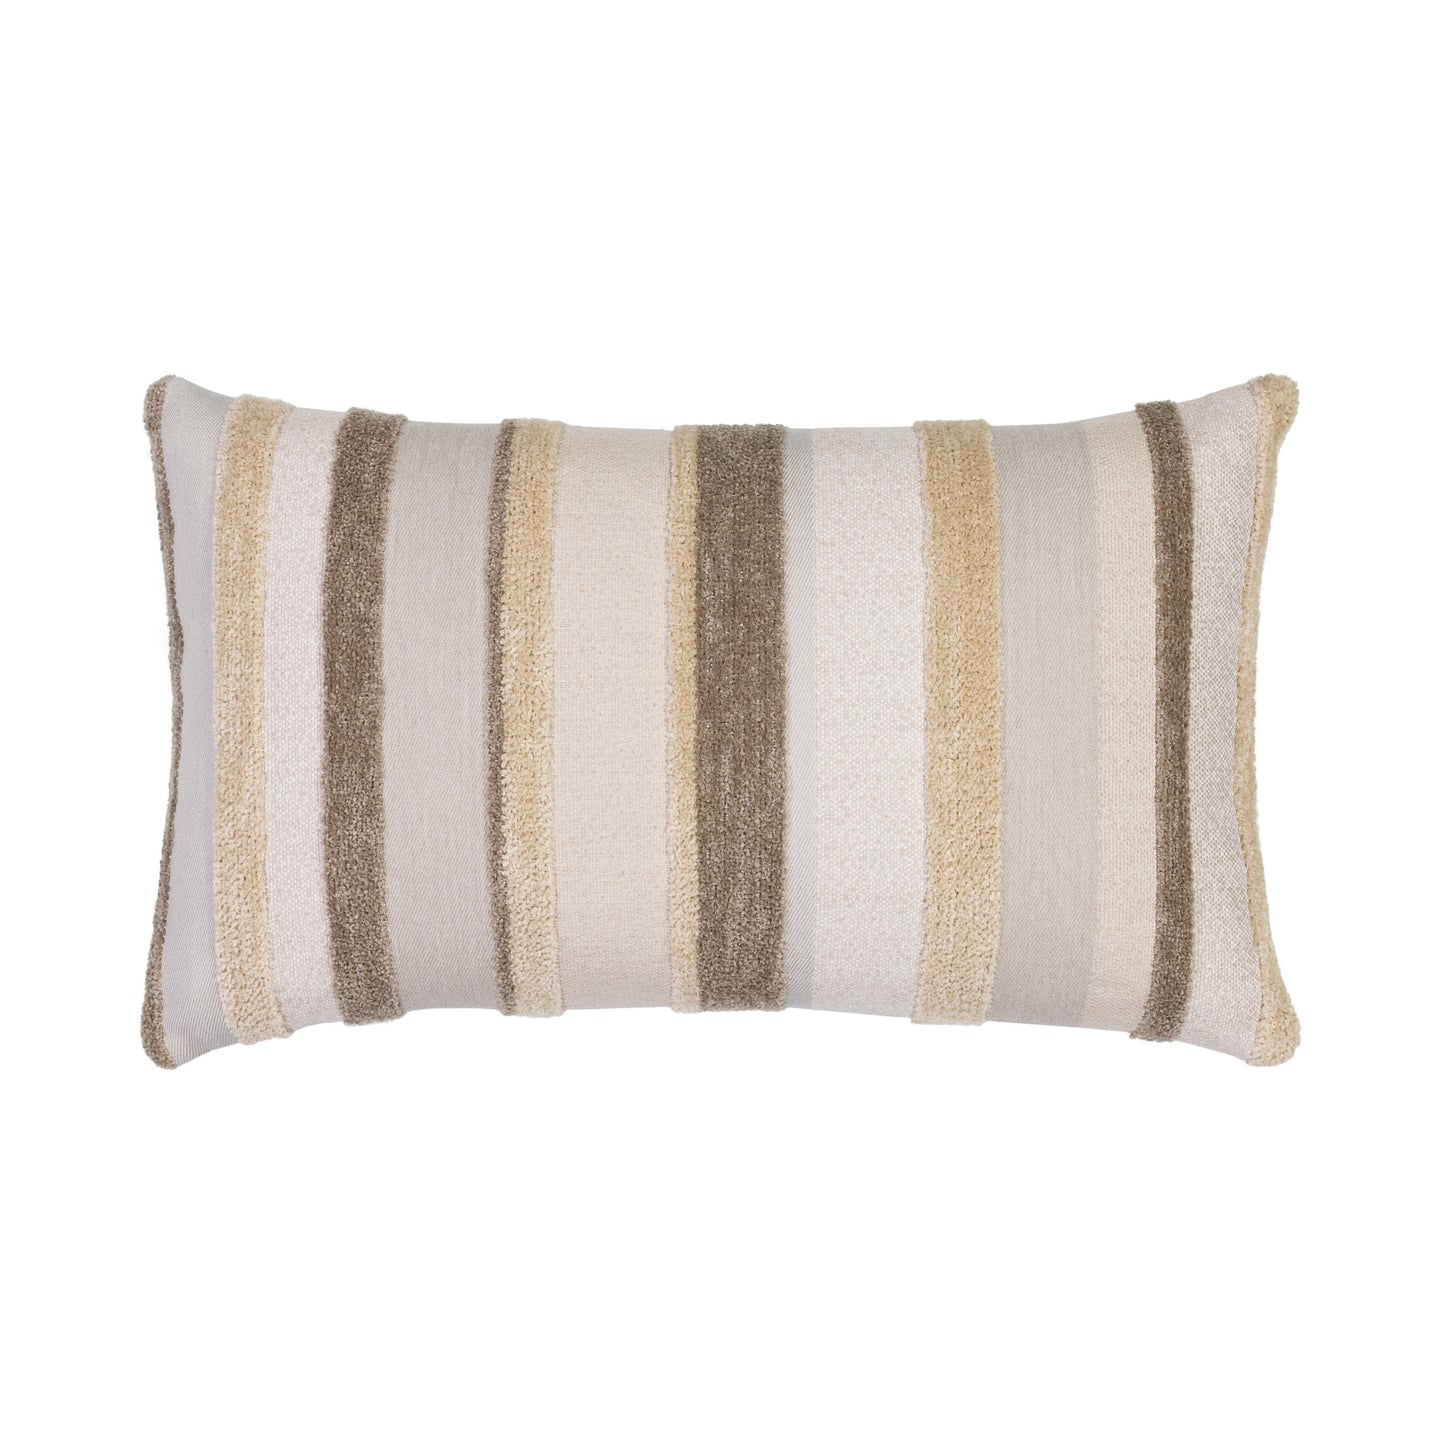 12" x 20" Elaine Smith Pillow  Luxe Channel Latte